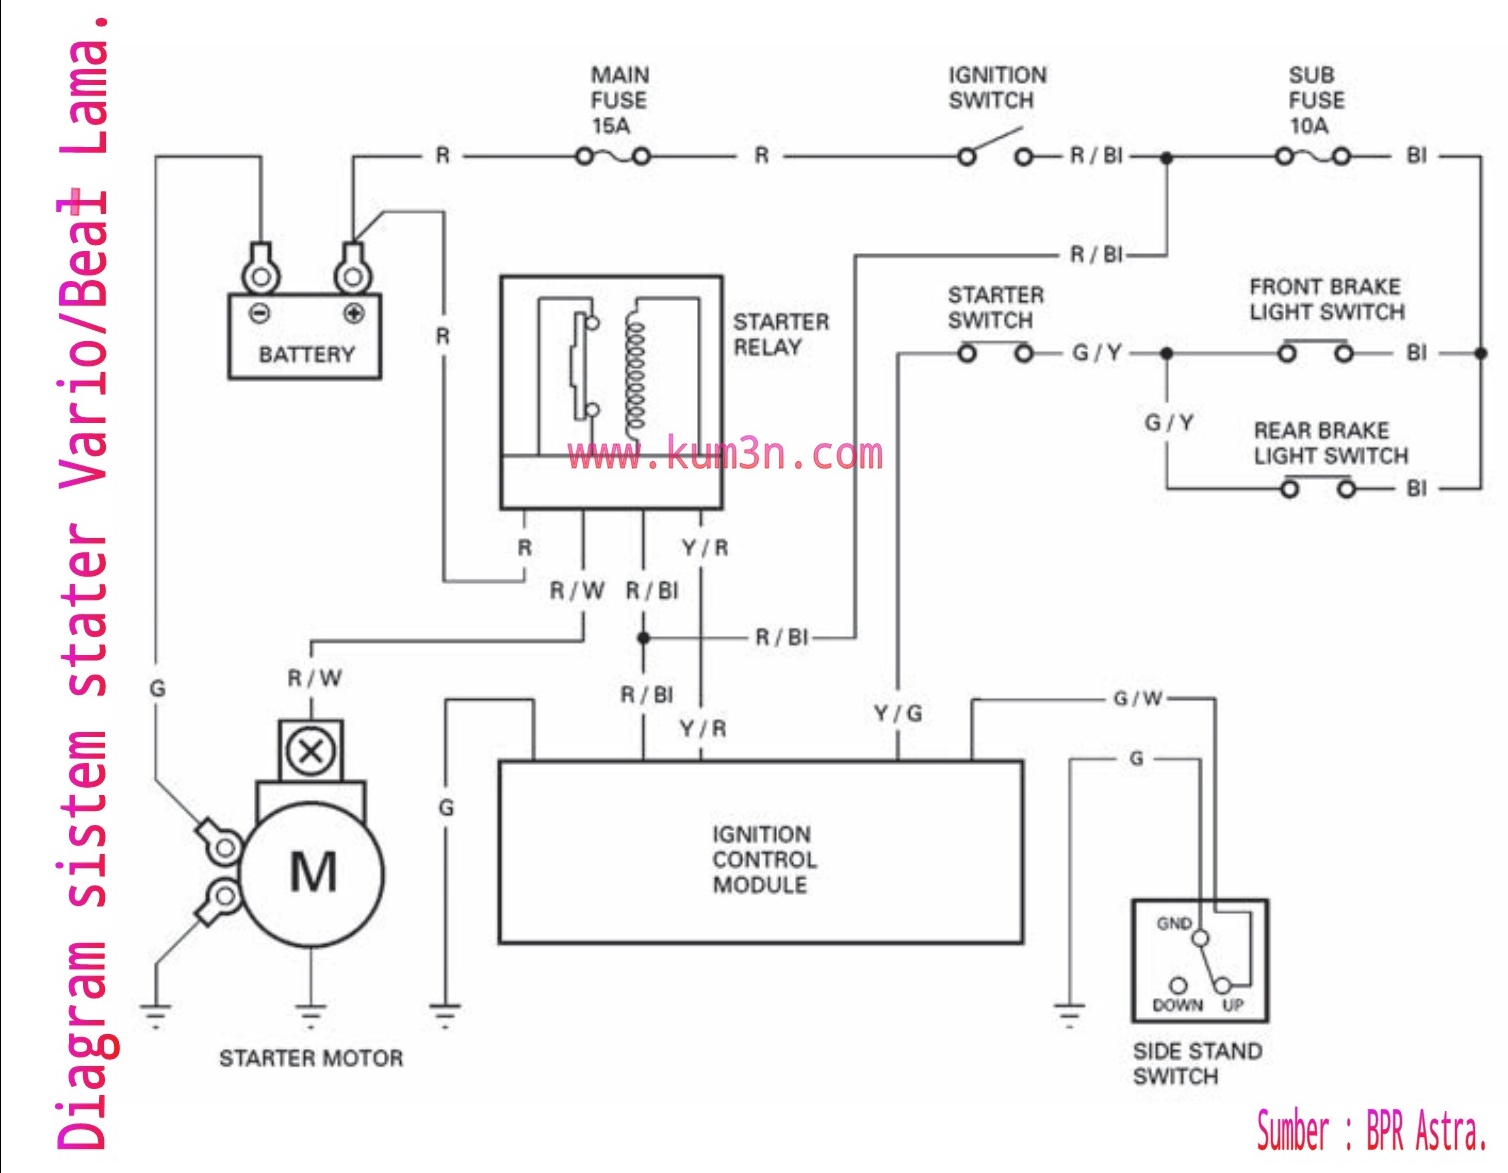 Ignition Switch Wiring Diagram Diesel Engine from 2.bp.blogspot.com